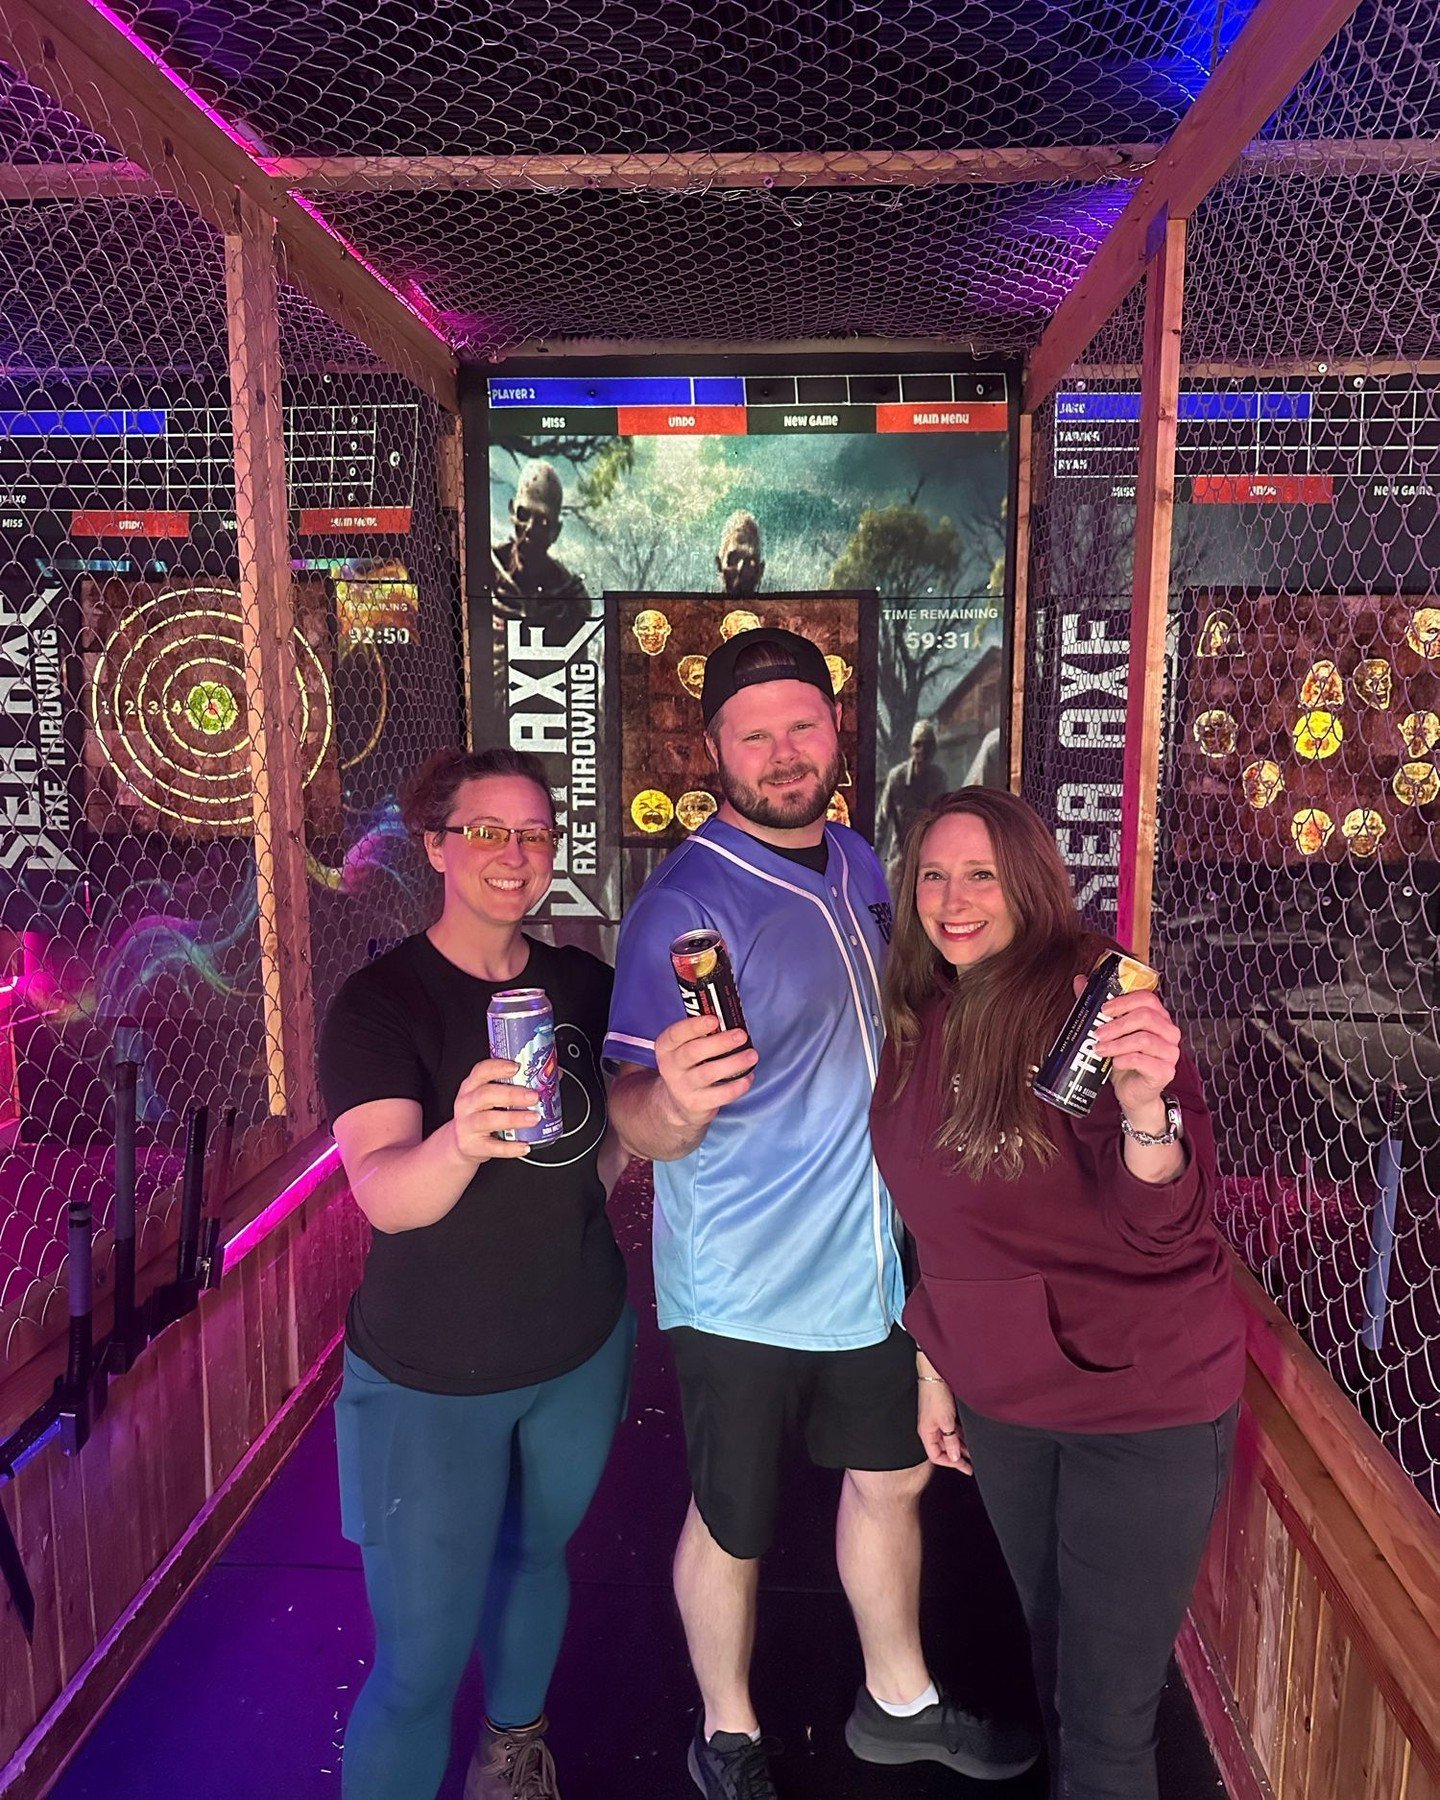 Throwing axes and raising glasses &ndash; it&rsquo;s how we roll at our place! #AxeAndCheer